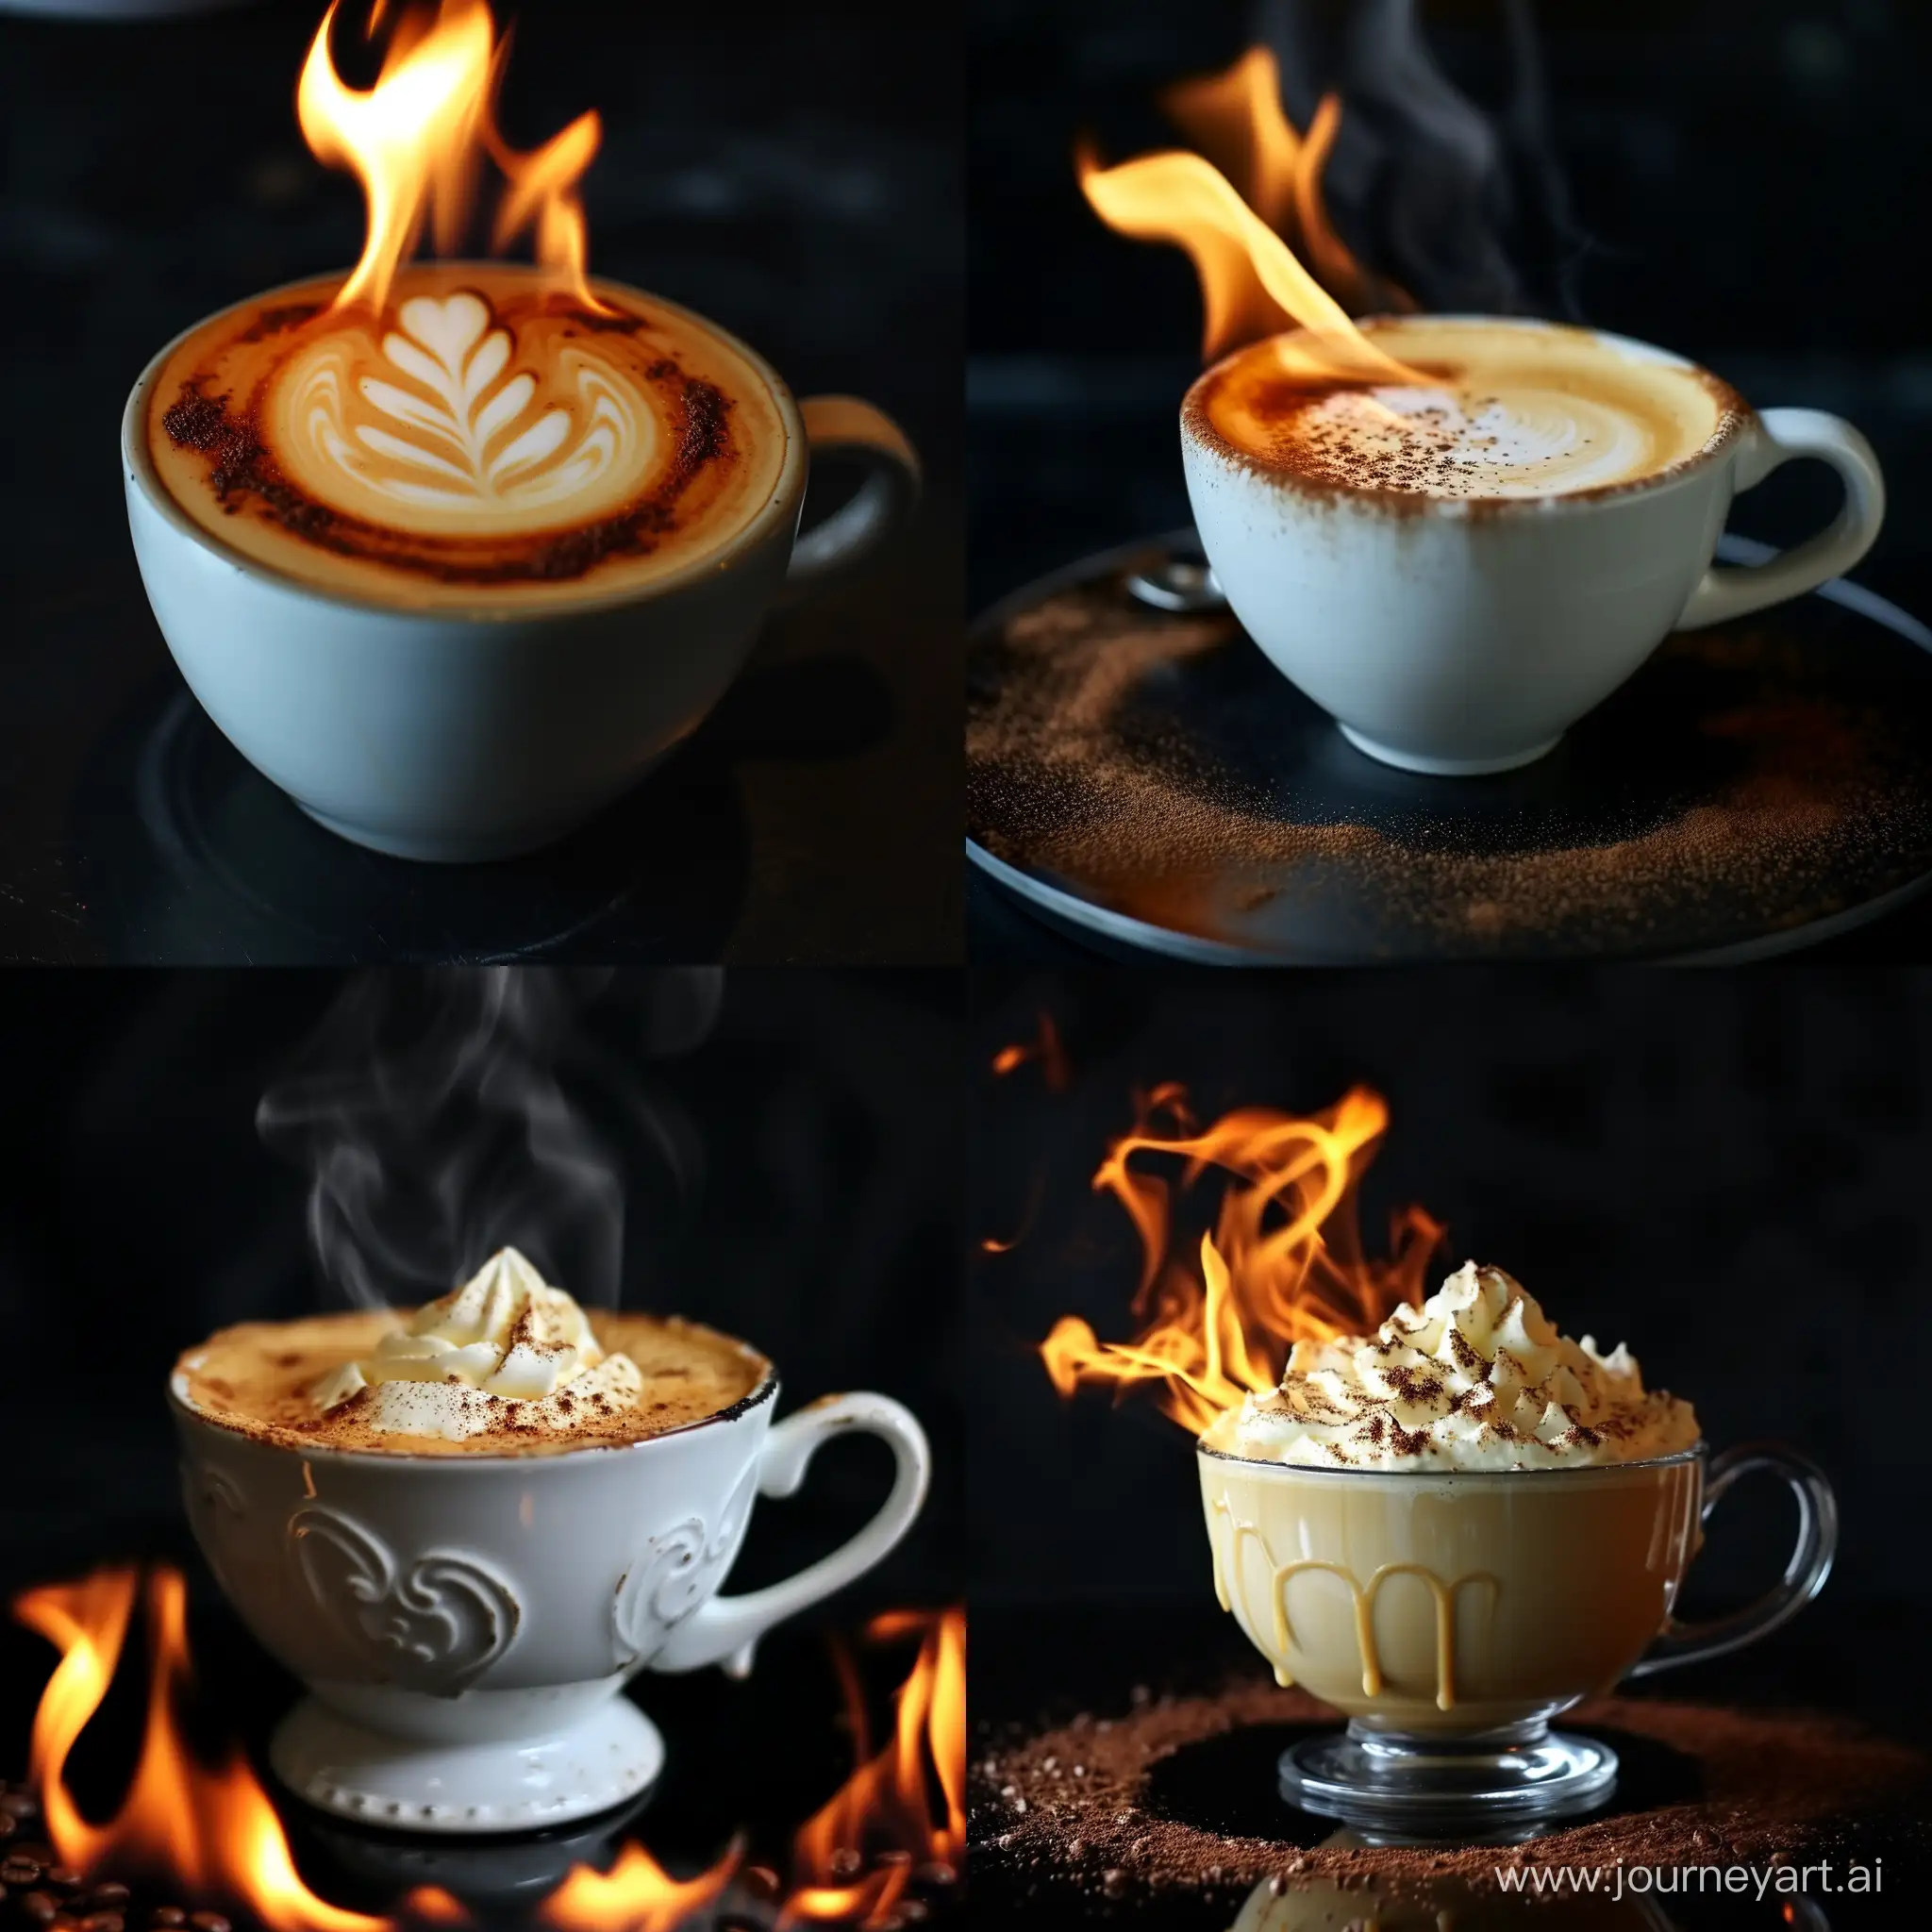 Baked-Latte-Cup-with-Fiery-Ambiance